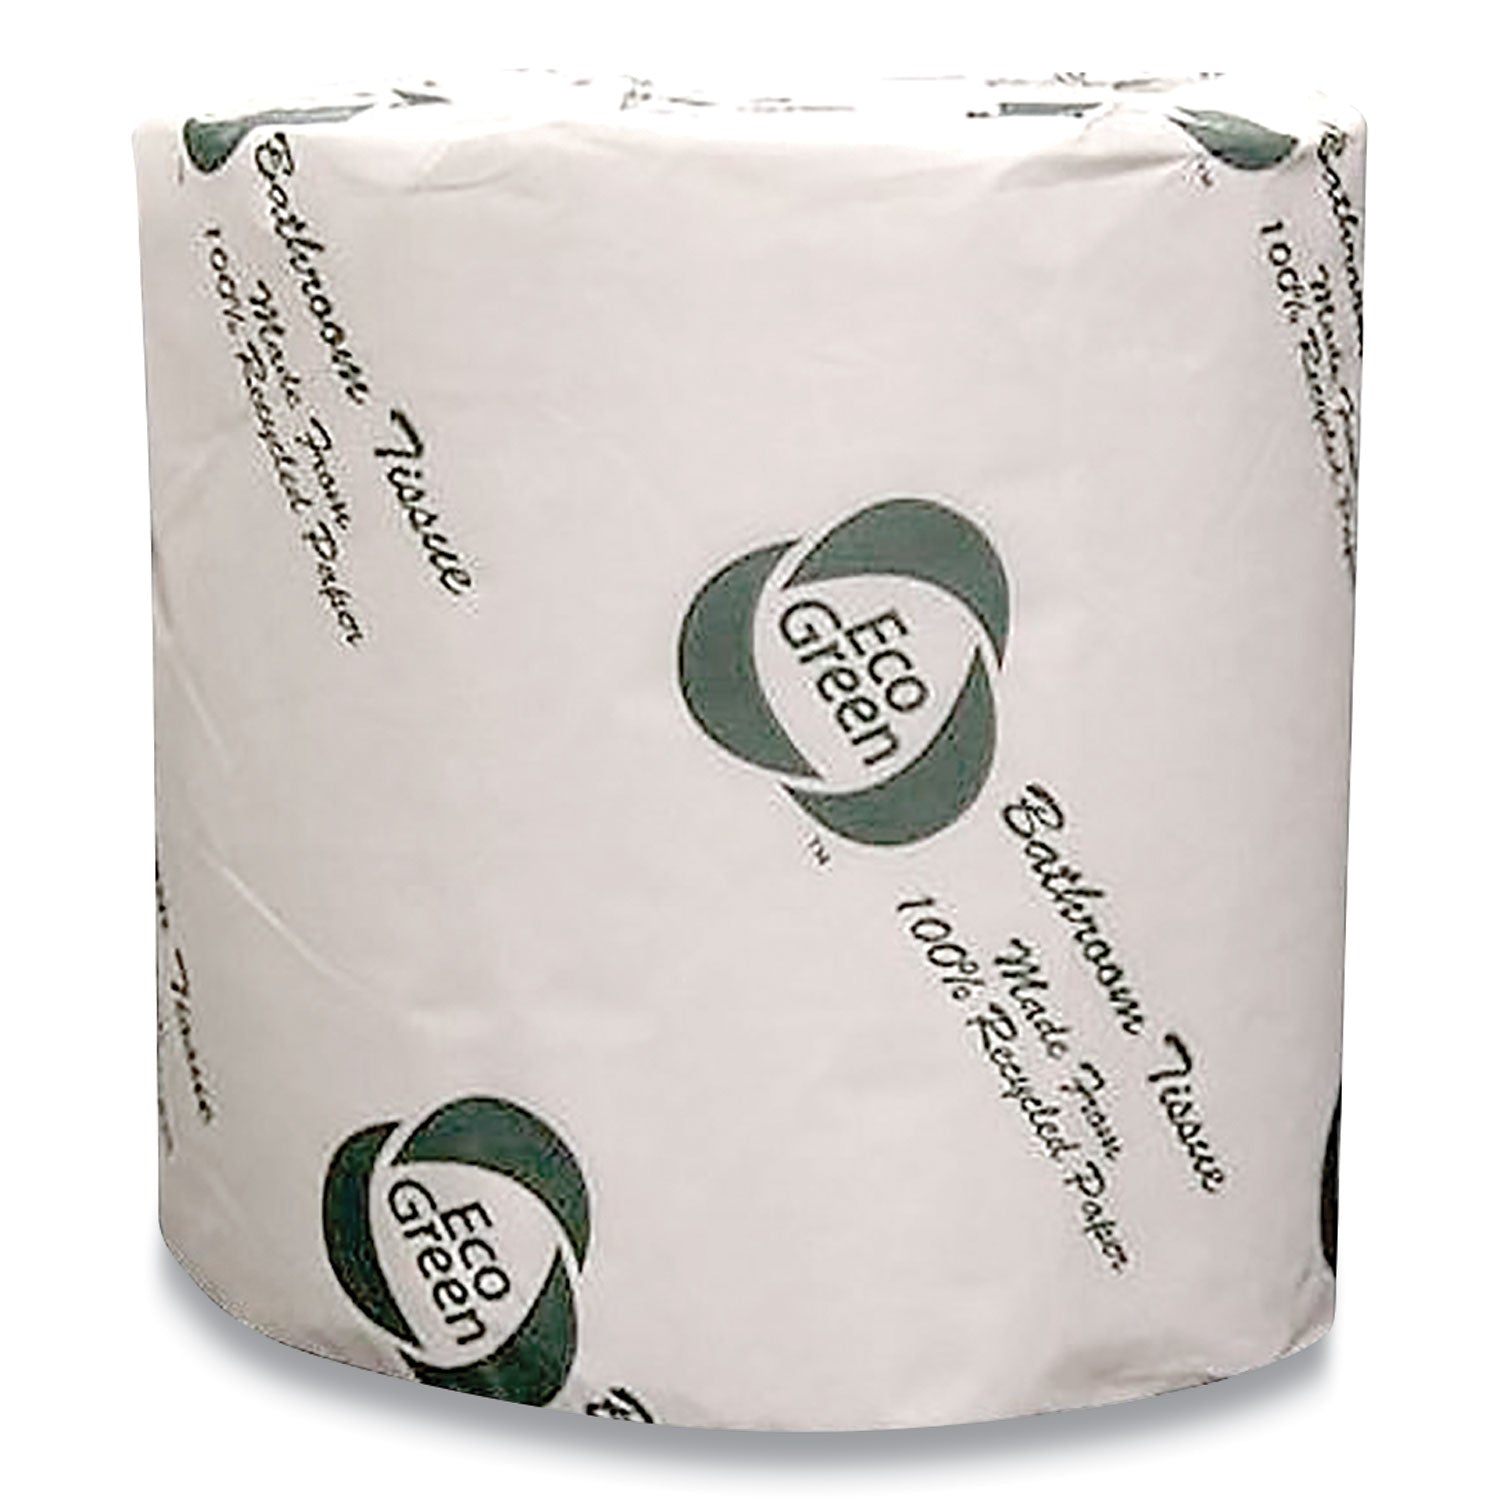 recycled-2-ply-standard-toilet-paper-septic-safe-white-600-sheets-roll-48-rolls-carton_apaebw680 - 1